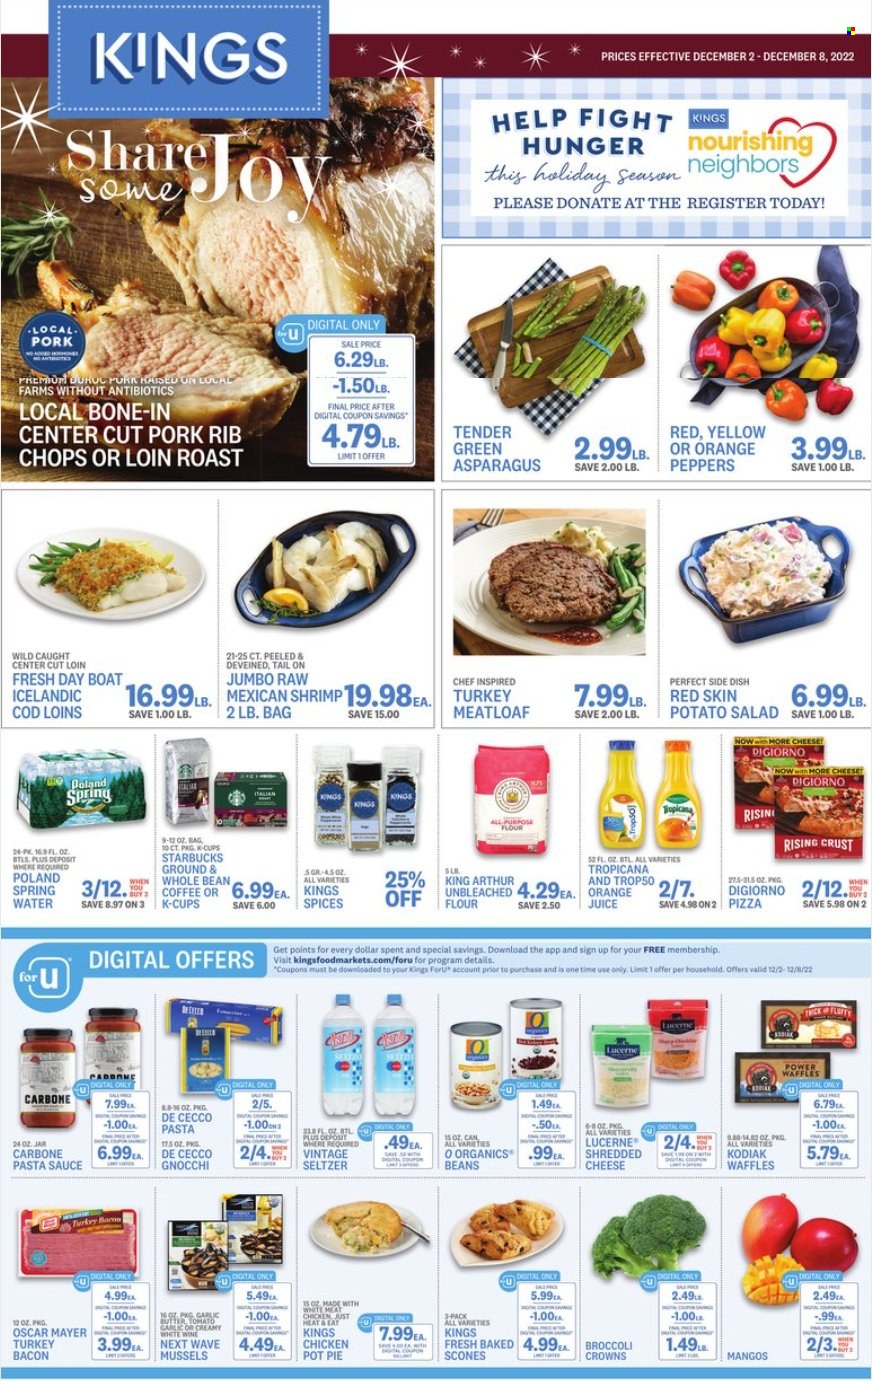 thumbnail - Kings Food Markets Flyer - 12/02/2022 - 12/08/2022 - Sales products - pie, pot pie, waffles, asparagus, broccoli, salad, peppers, mango, cod, mussels, shrimps, gnocchi, pizza, pasta sauce, sauce, meatloaf, bacon, turkey bacon, Oscar Mayer, potato salad, shredded cheese, butter, all purpose flour, flour, orange juice, juice, seltzer water, coffee, Starbucks, coffee capsules, K-Cups, white wine, rib chops. Page 1.